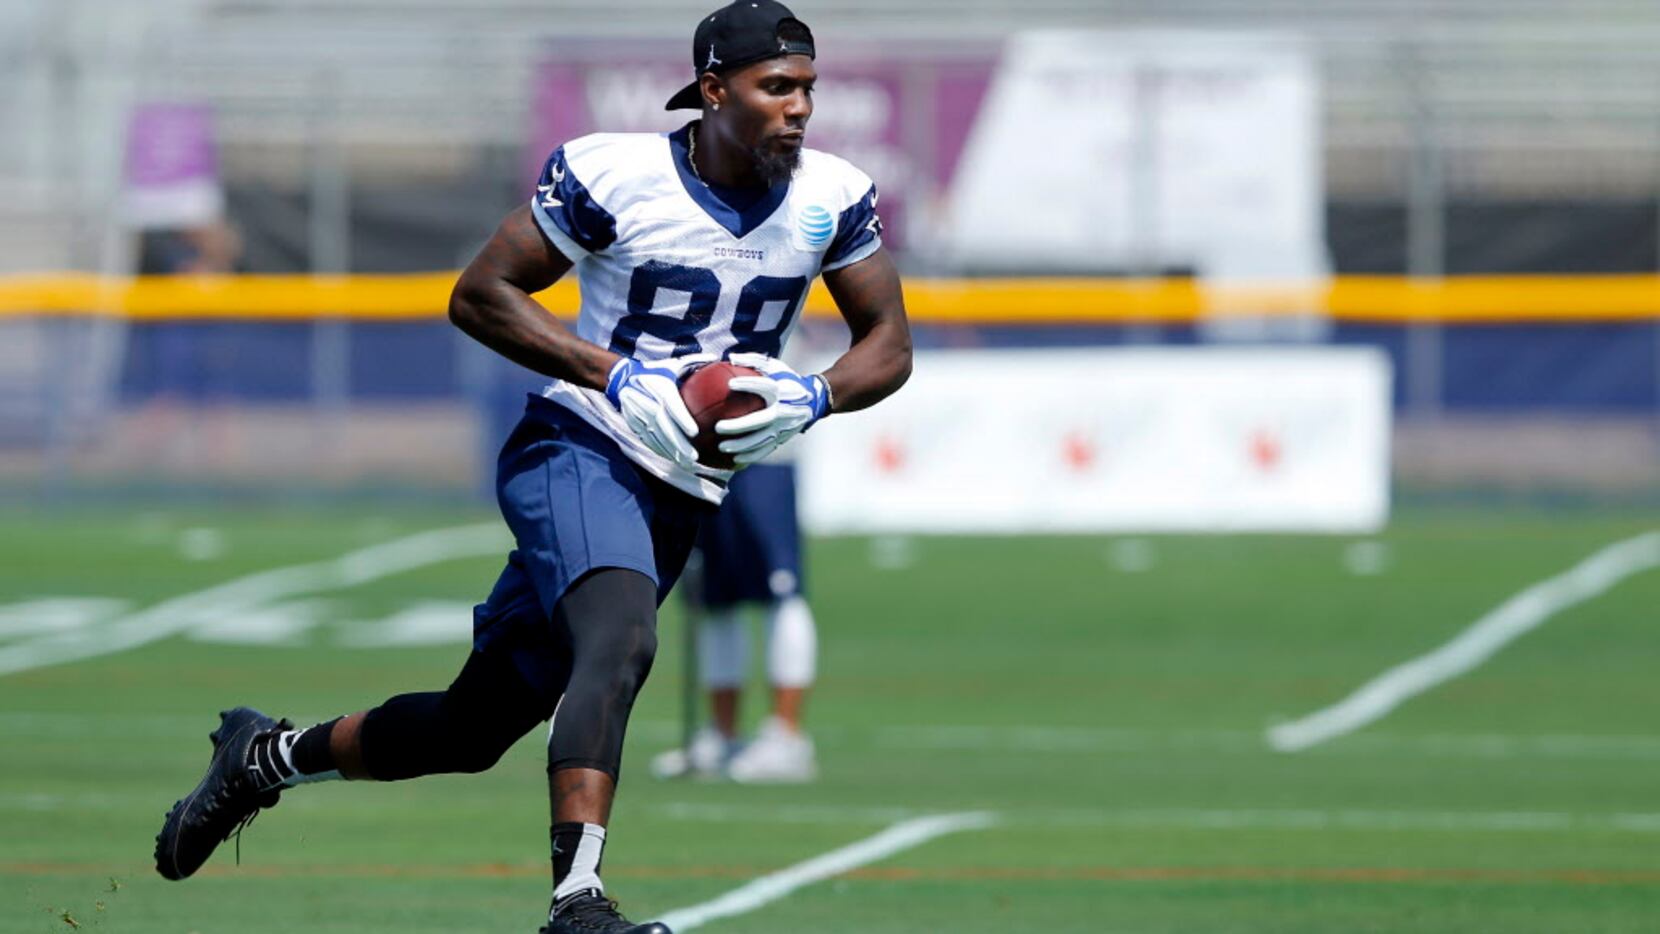 Dallas Cowboys wide receiver Dez Bryant (88) makes a catch and runs with the ball during the...